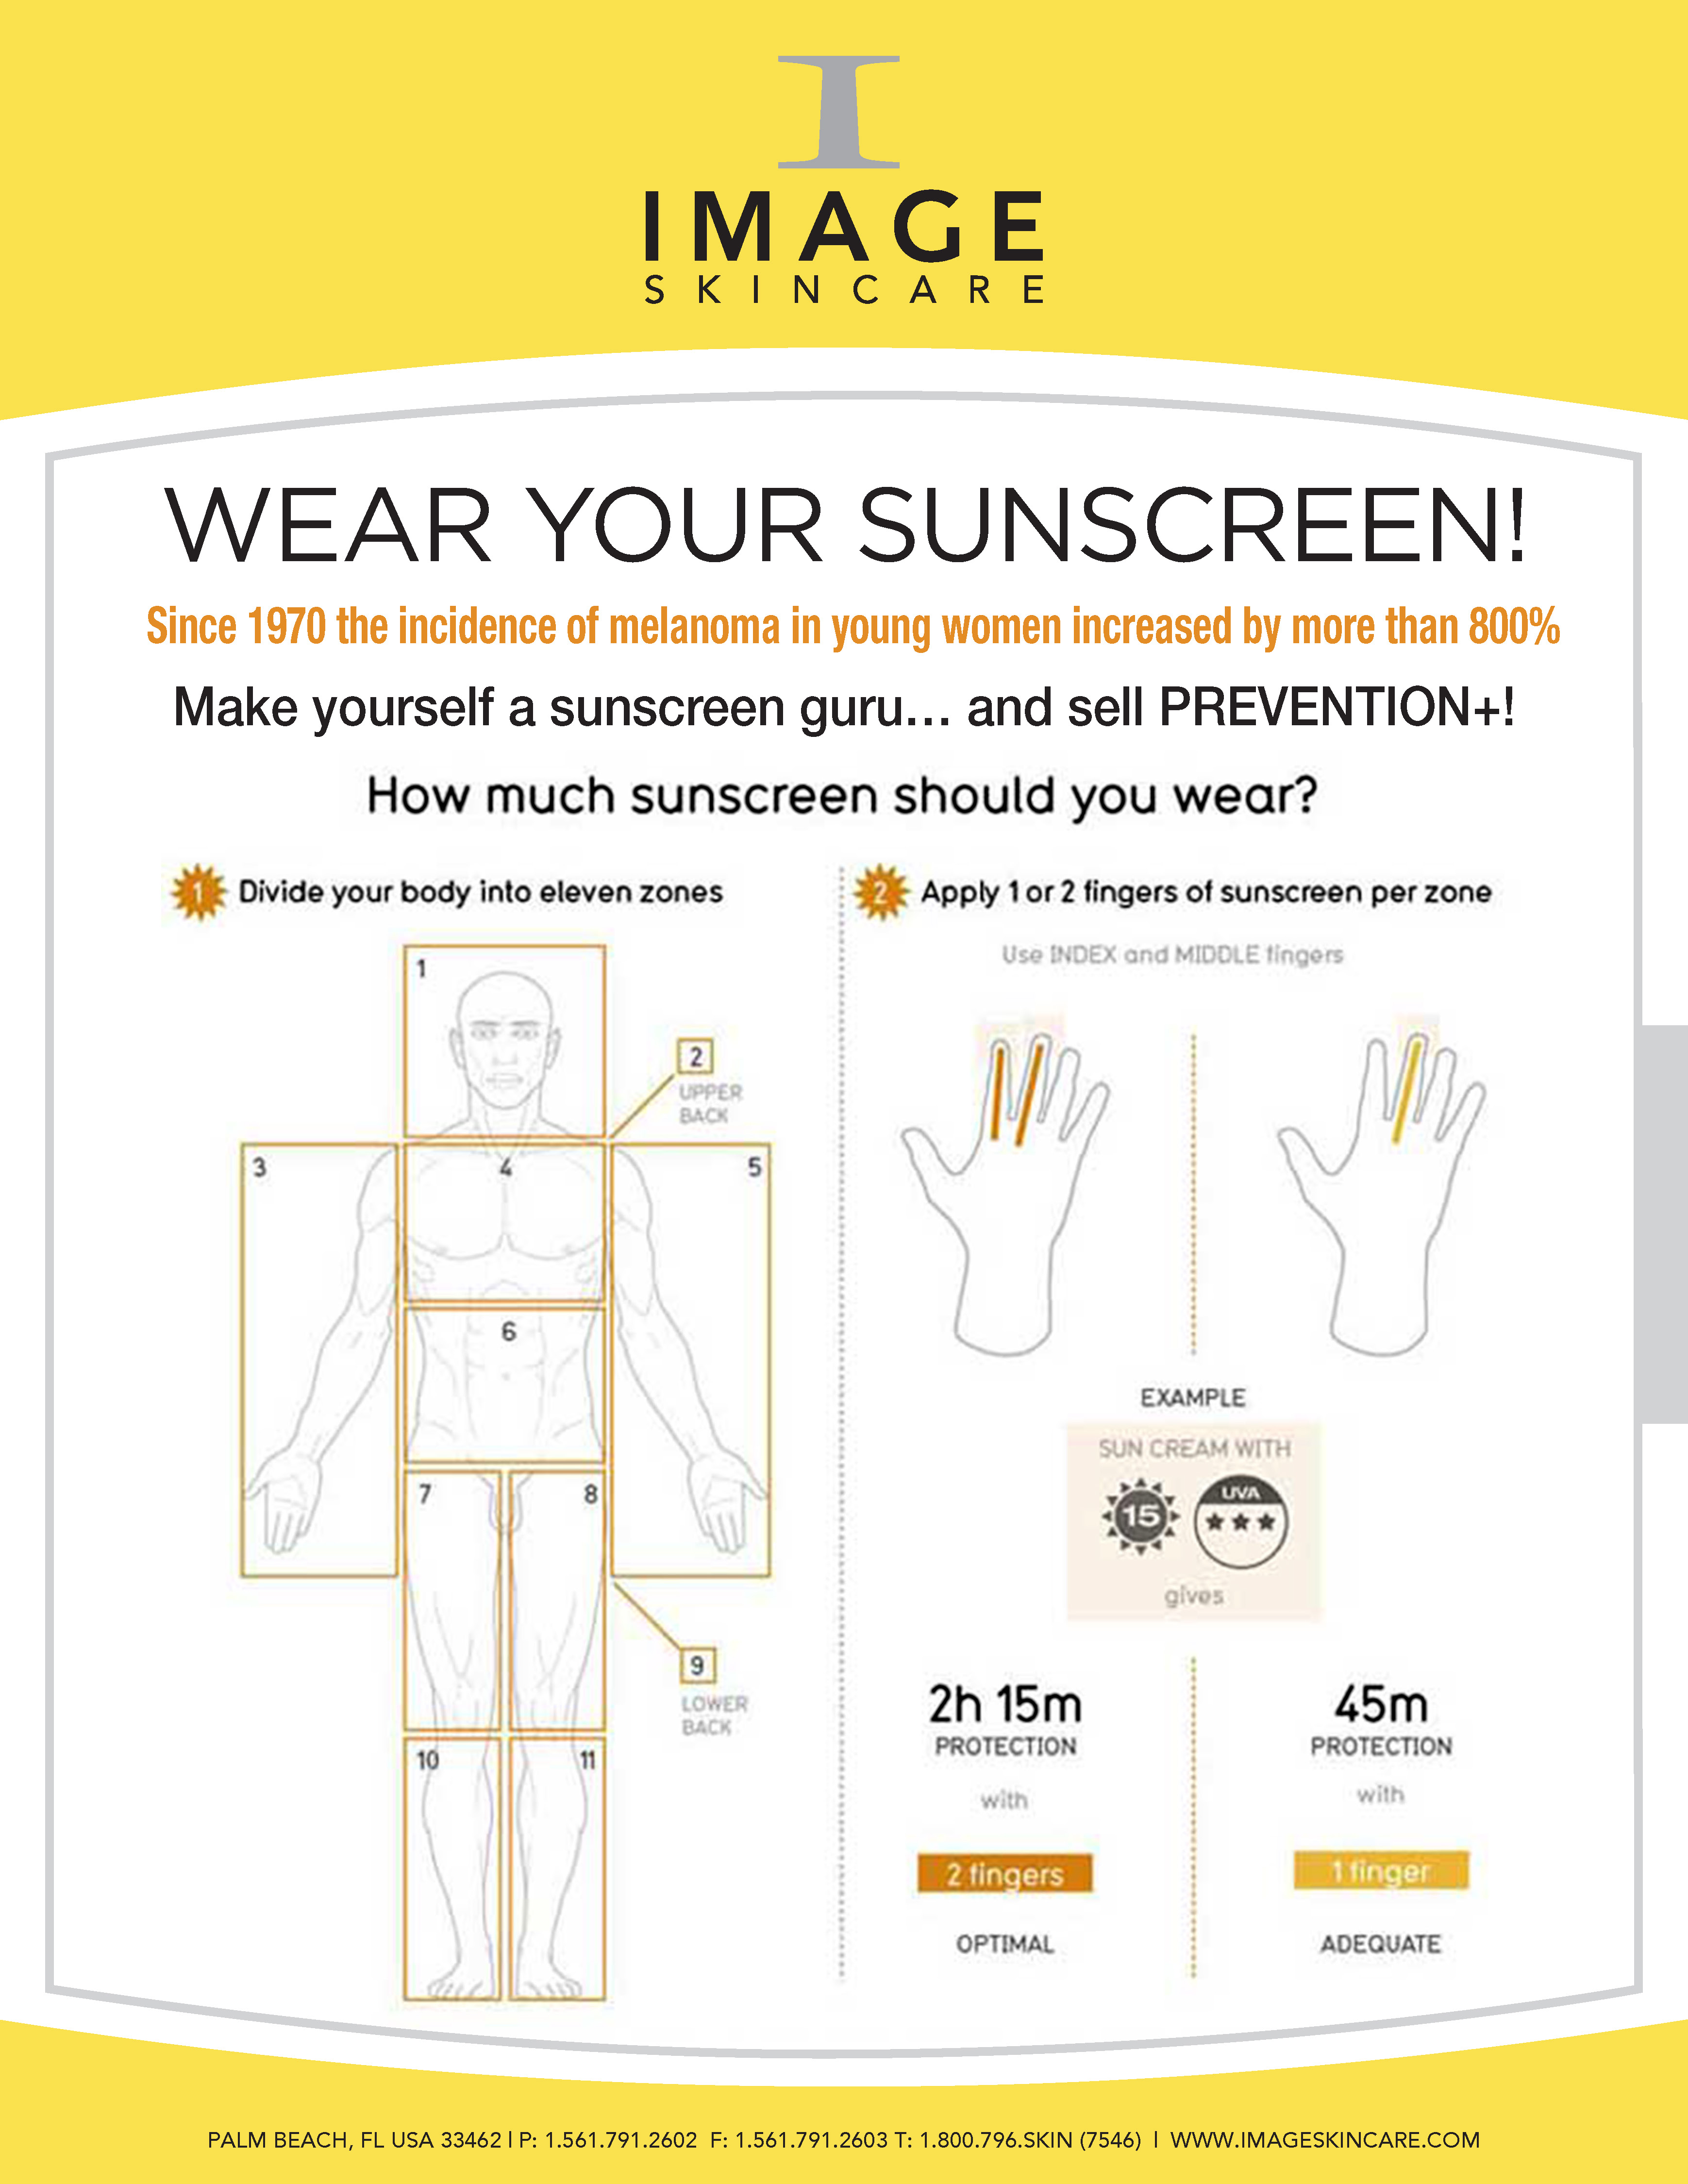 Sunscreen Facts by Image Skincare_Page_1